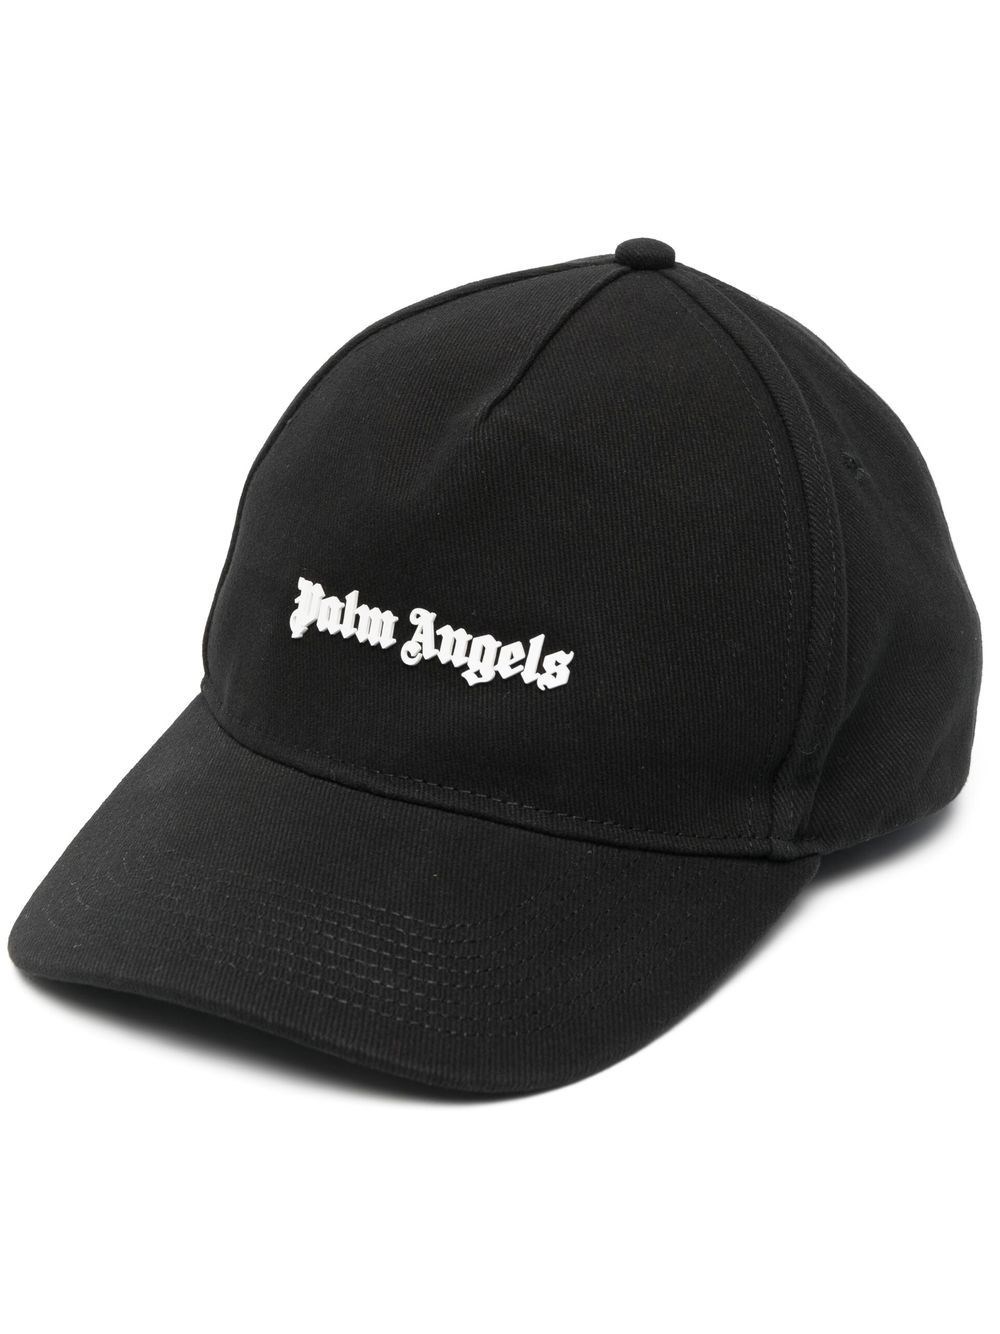 palm angels CAPPELLO LOGO available on montiboutique.com - 49296